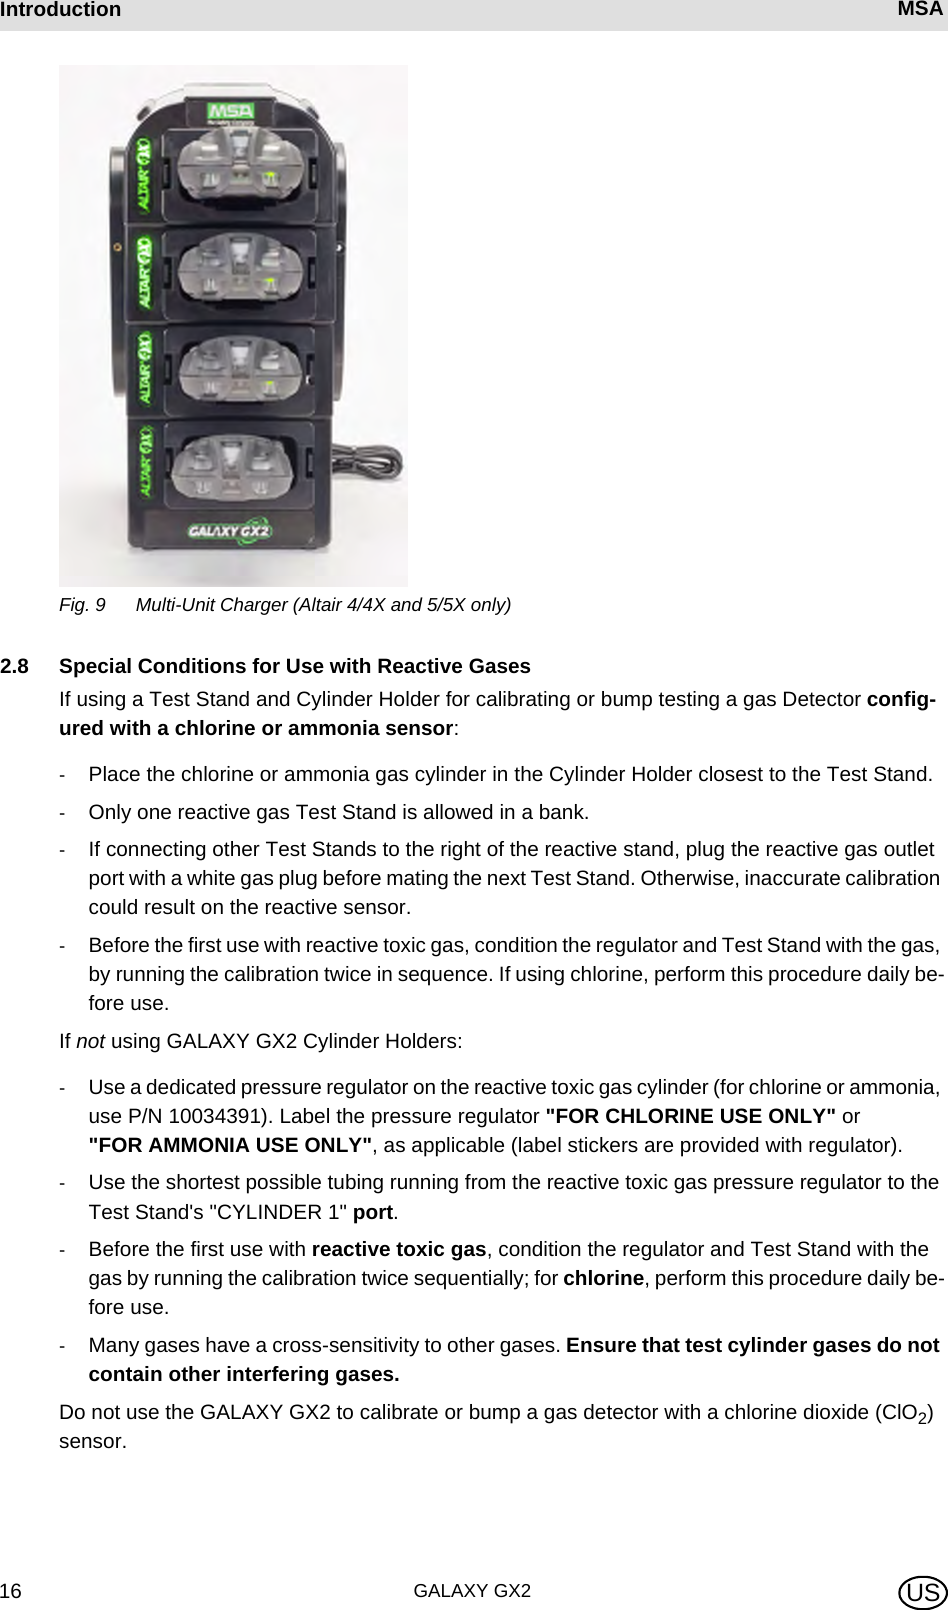 GALAXY GX216Introduction MSA USFig. 9 Multi-Unit Charger (Altair 4/4X and 5/5X only)2.8 Special Conditions for Use with Reactive GasesIf using a Test Stand and Cylinder Holder for calibrating or bump testing a gas Detector config-ured with a chlorine or ammonia sensor:-Place the chlorine or ammonia gas cylinder in the Cylinder Holder closest to the Test Stand.-Only one reactive gas Test Stand is allowed in a bank.-If connecting other Test Stands to the right of the reactive stand, plug the reactive gas outlet port with a white gas plug before mating the next Test Stand. Otherwise, inaccurate calibration could result on the reactive sensor.-Before the first use with reactive toxic gas, condition the regulator and Test Stand with the gas, by running the calibration twice in sequence. If using chlorine, perform this procedure daily be-fore use.If not using GALAXY GX2 Cylinder Holders:-Use a dedicated pressure regulator on the reactive toxic gas cylinder (for chlorine or ammonia, use P/N 10034391). Label the pressure regulator &quot;FOR CHLORINE USE ONLY&quot; or &quot;FOR AMMONIA USE ONLY&quot;, as applicable (label stickers are provided with regulator).-Use the shortest possible tubing running from the reactive toxic gas pressure regulator to the Test Stand&apos;s &quot;CYLINDER 1&quot; port.-Before the first use with reactive toxic gas, condition the regulator and Test Stand with the gas by running the calibration twice sequentially; for chlorine, perform this procedure daily be-fore use.-Many gases have a cross-sensitivity to other gases. Ensure that test cylinder gases do not contain other interfering gases.Do not use the GALAXY GX2 to calibrate or bump a gas detector with a chlorine dioxide (ClO2) sensor.